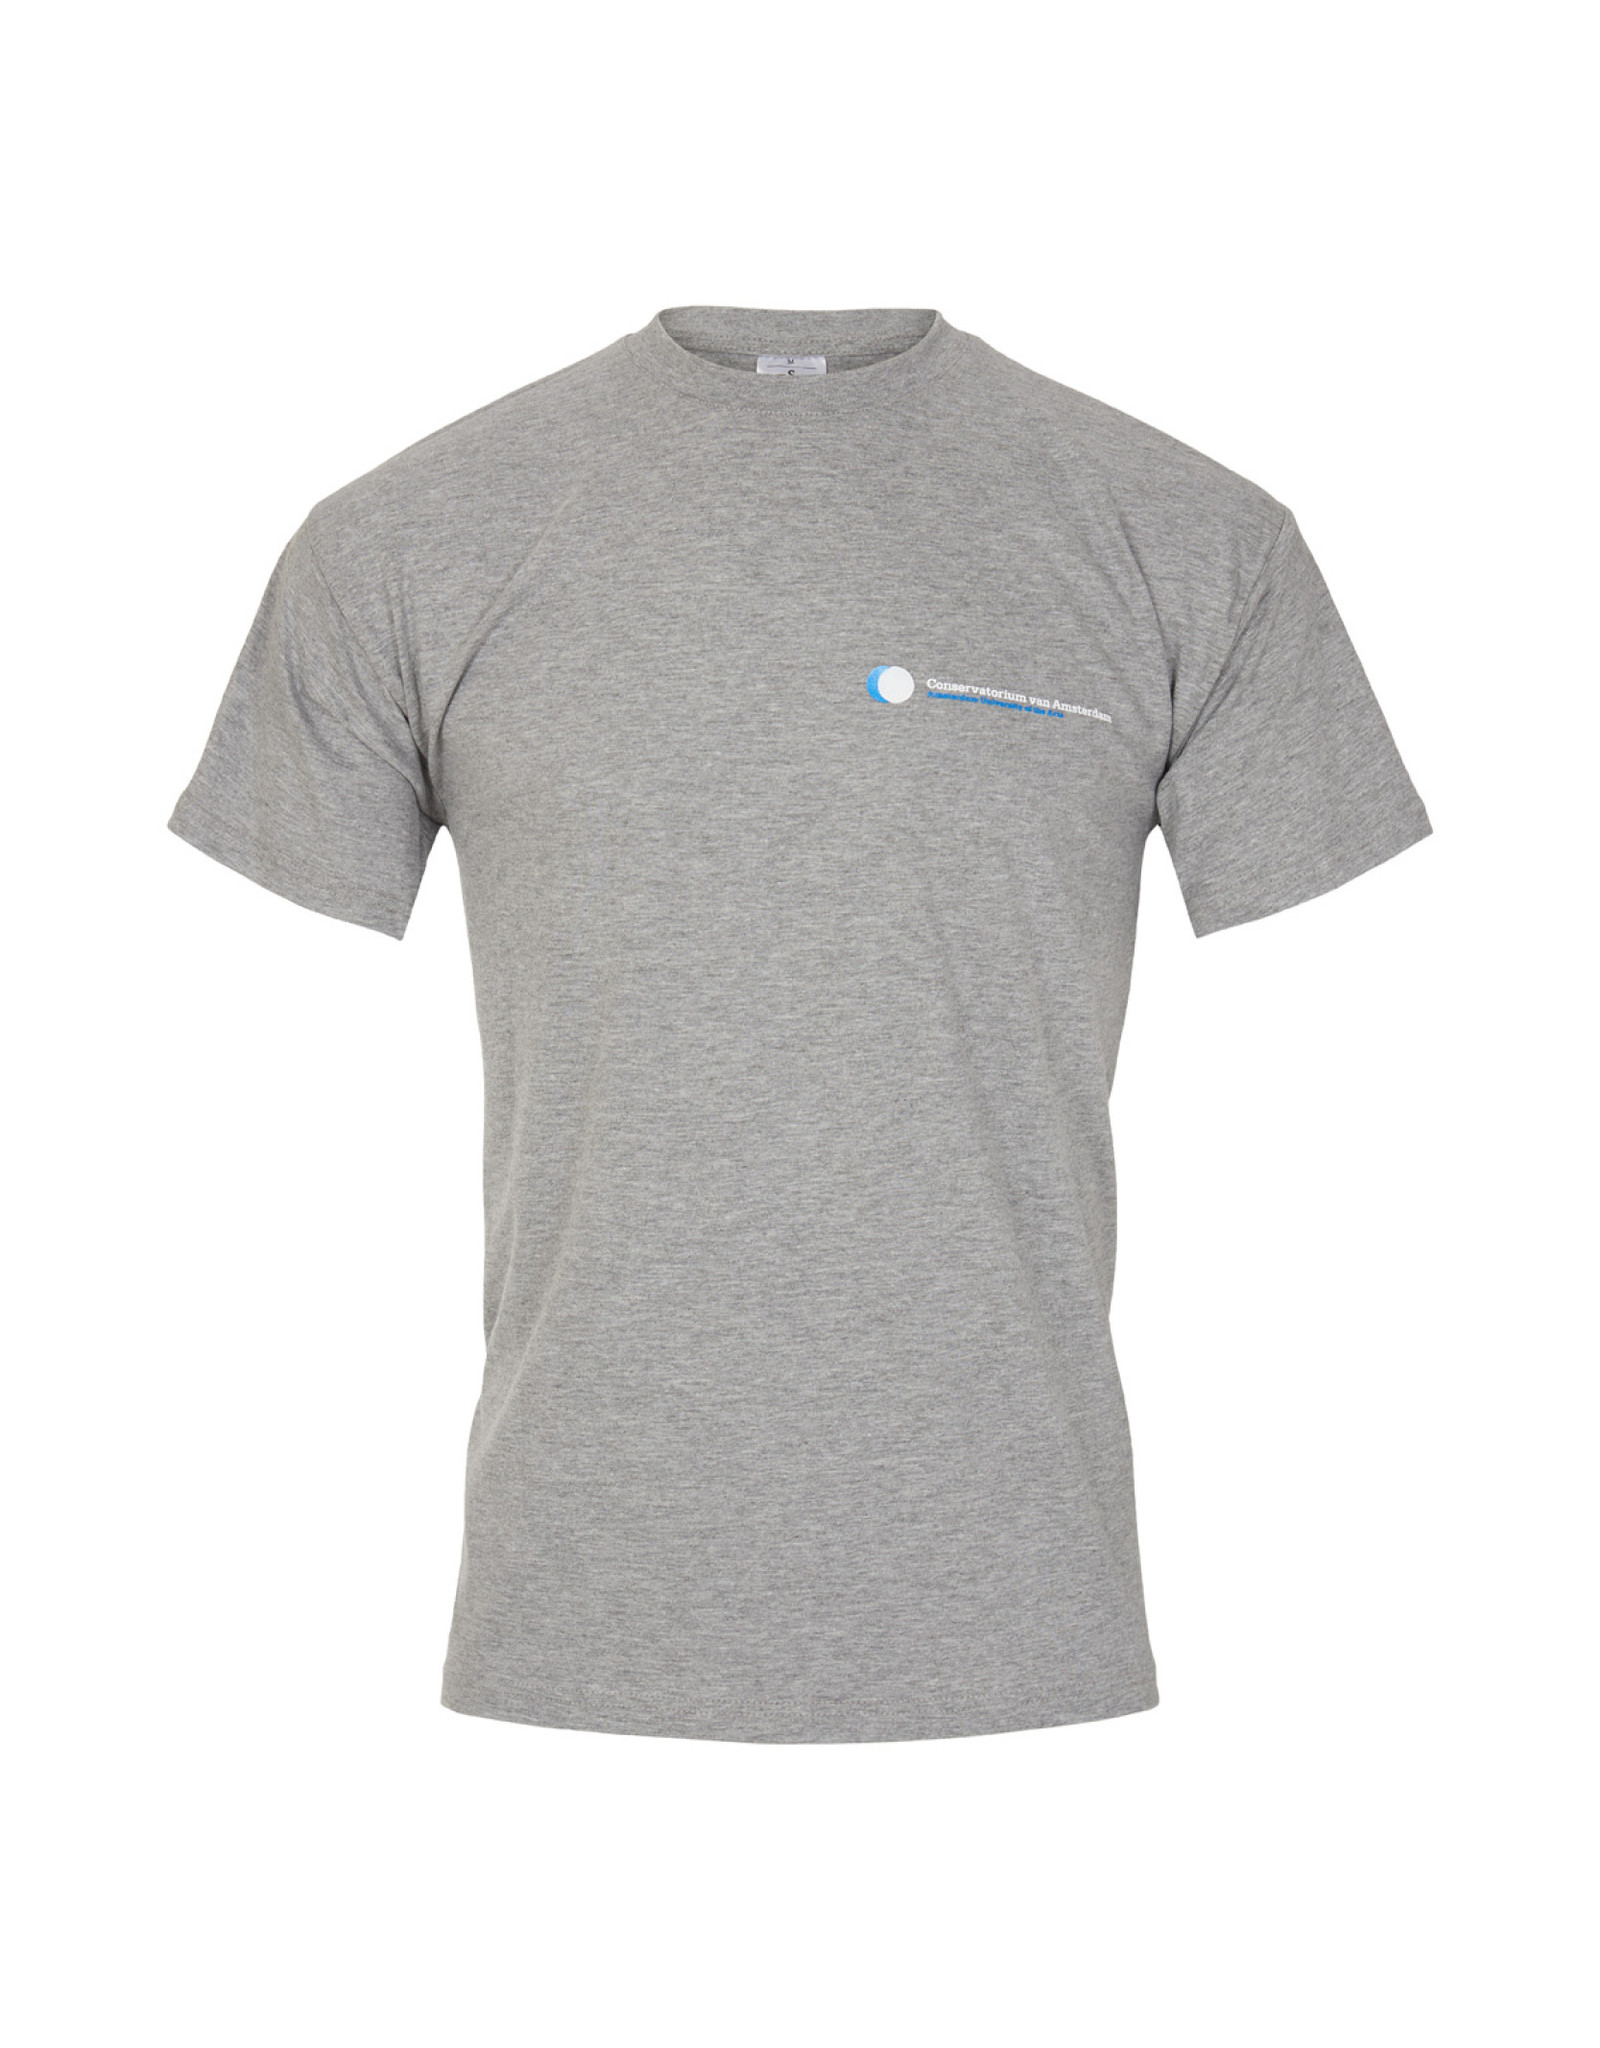 Classic short sleeve relaxed fit T-shirt - unisex